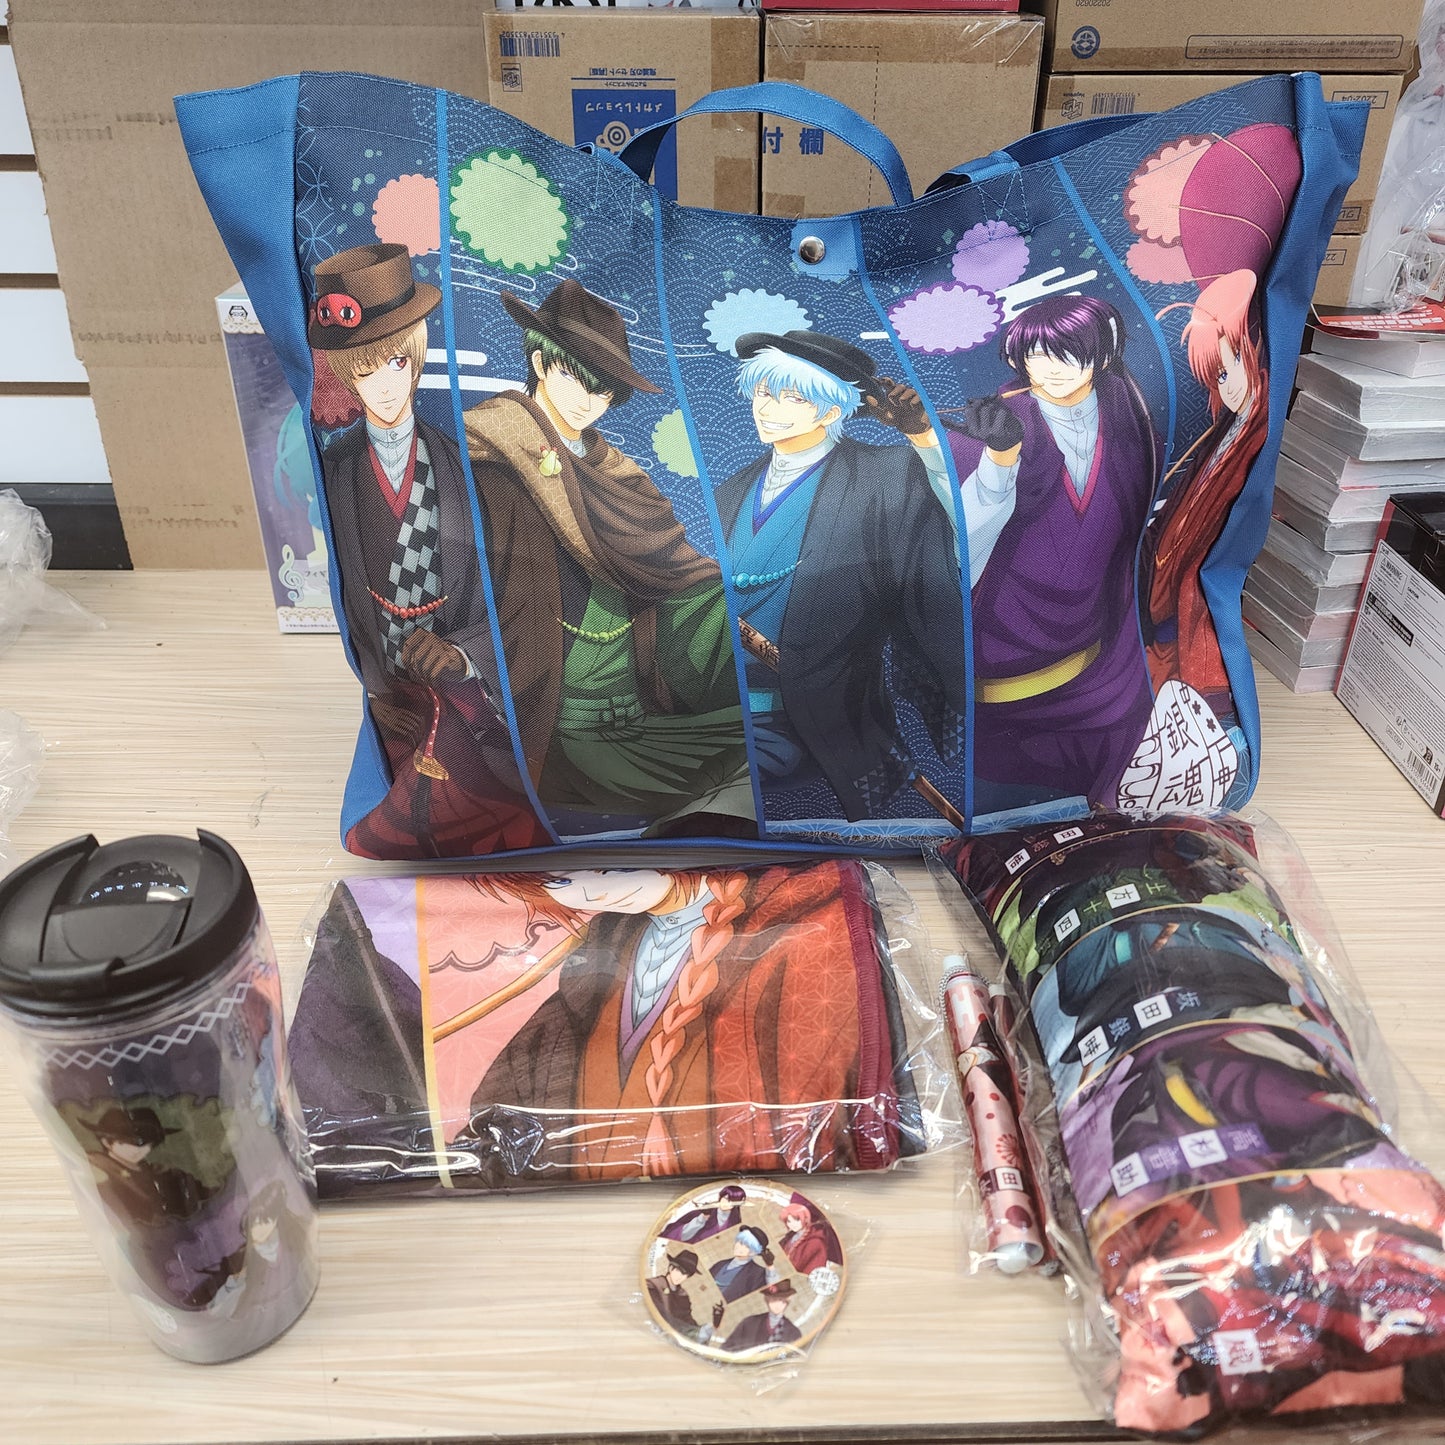 Gintama Goodie Bag Includes 1 Tumbler, 1 Small Pillow, 1 Button, 1 Small Wallscroll, 1 Blanket